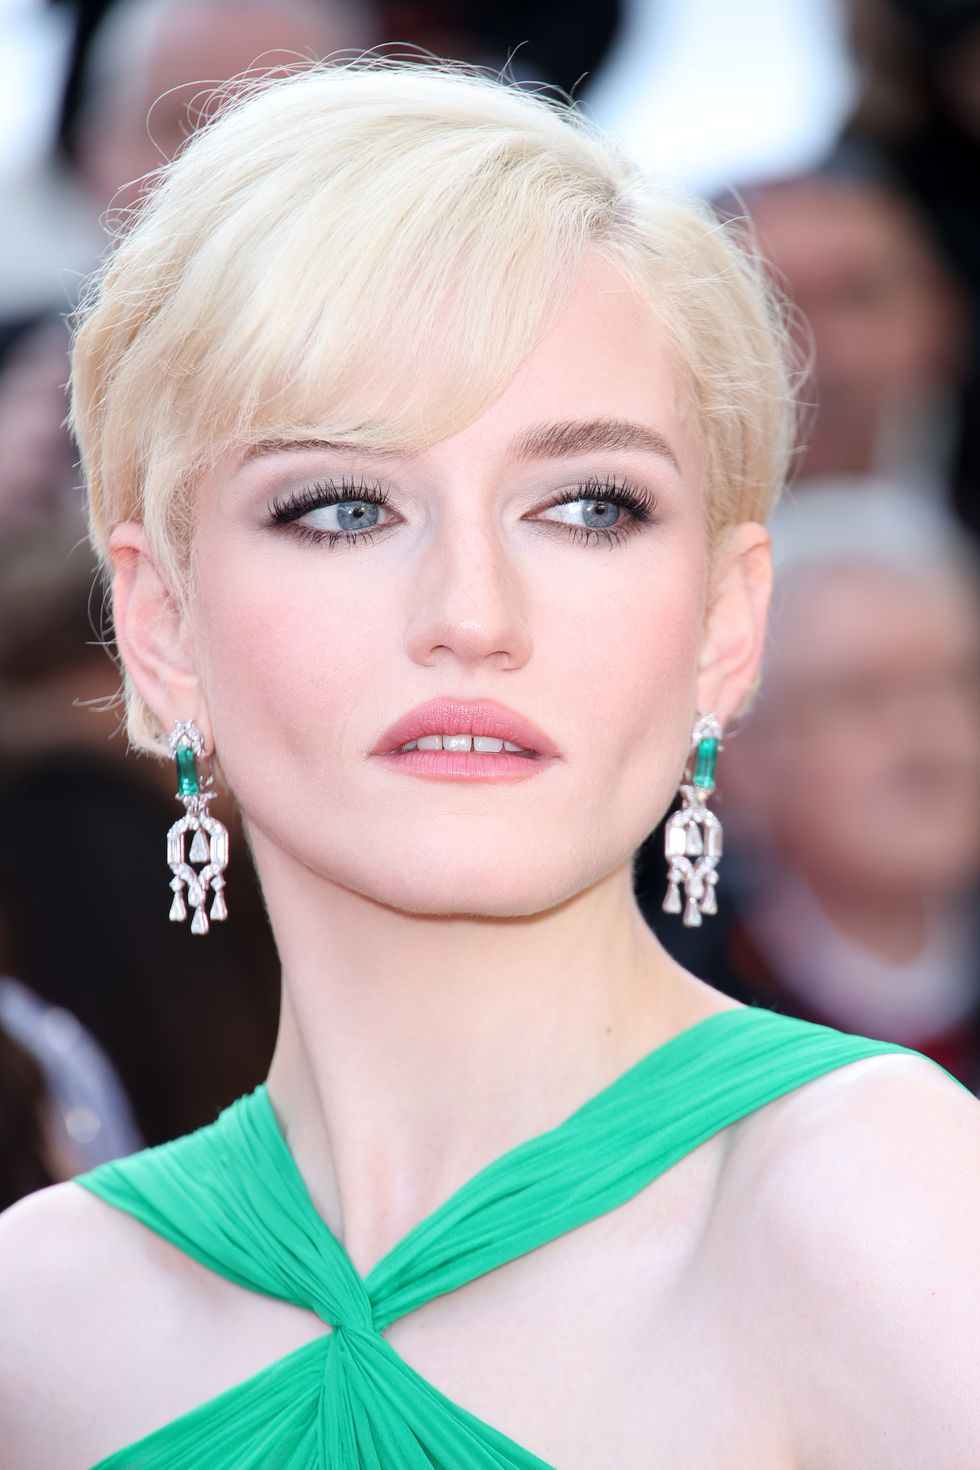 Cannes Film Festival 2023: Every Super Glam Celebrity Hair And Make-Up Look